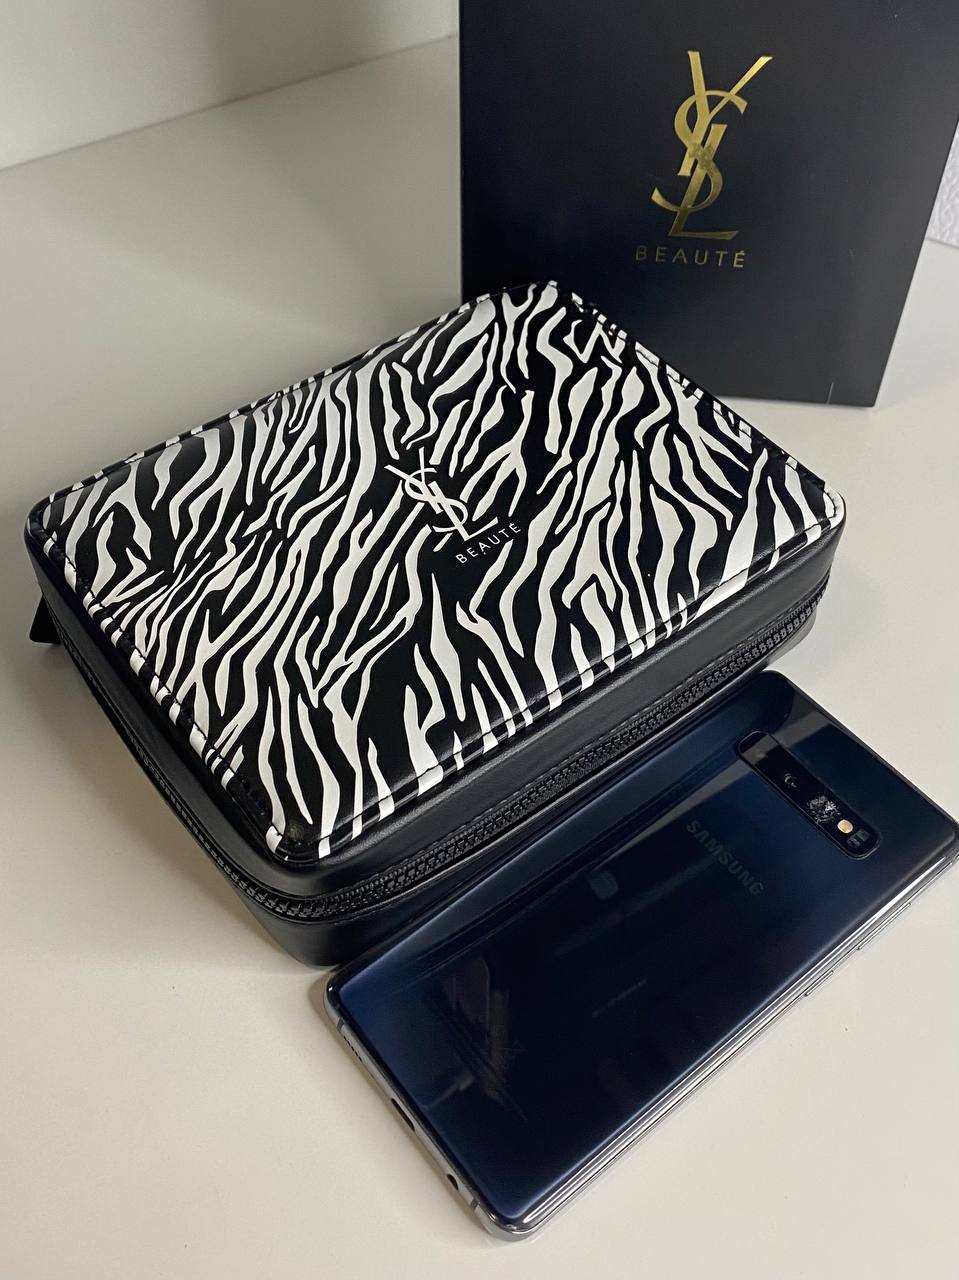 Luxurious YSL Beauty Pouch